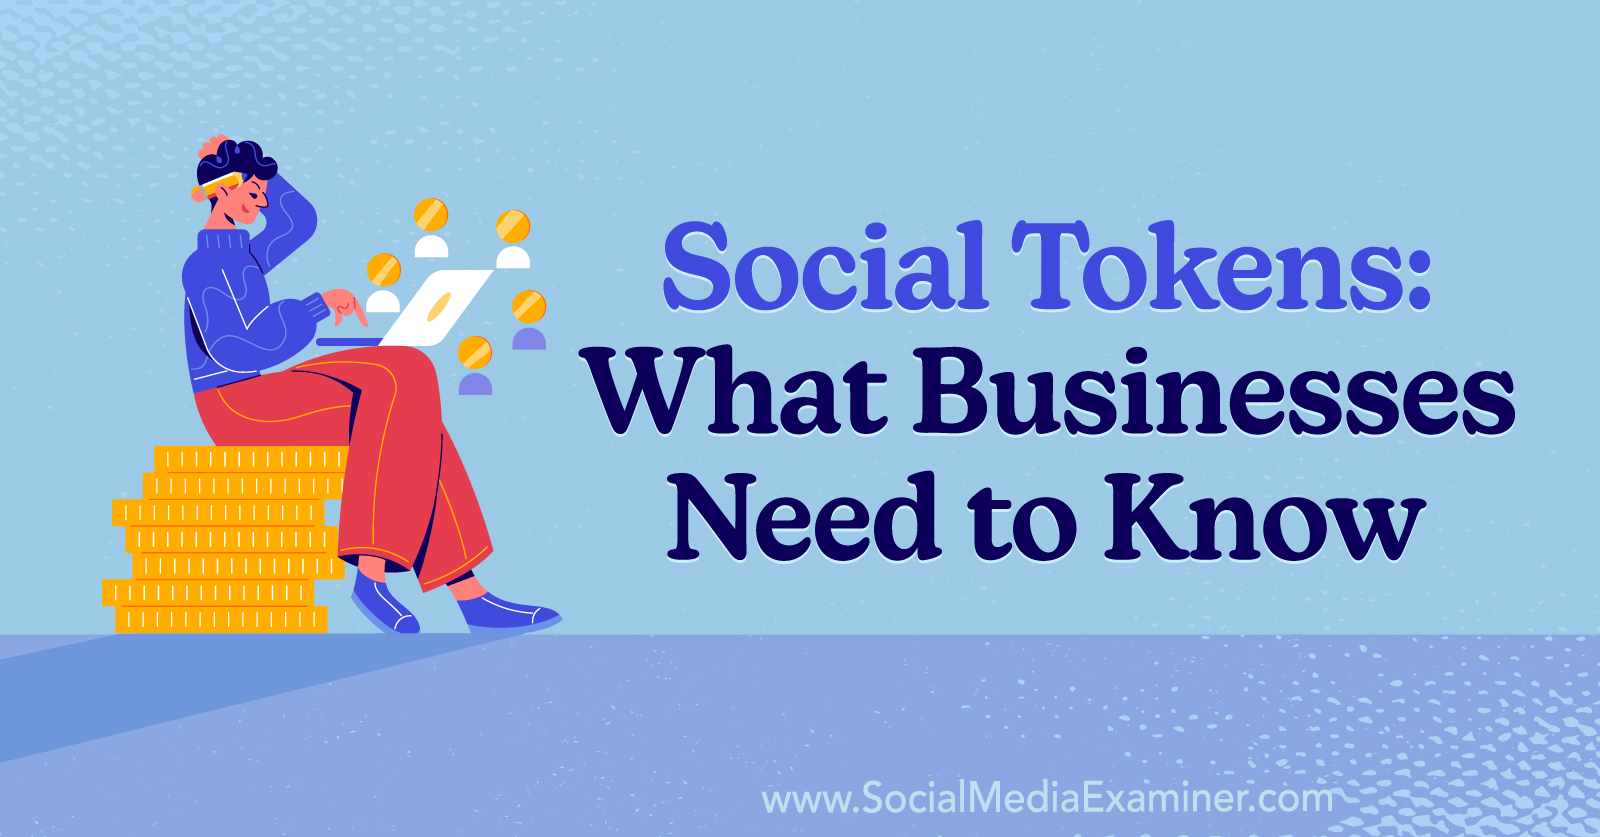 Social Tokens: What Businesses Need to Know featuring insights from Joe Pulizzi